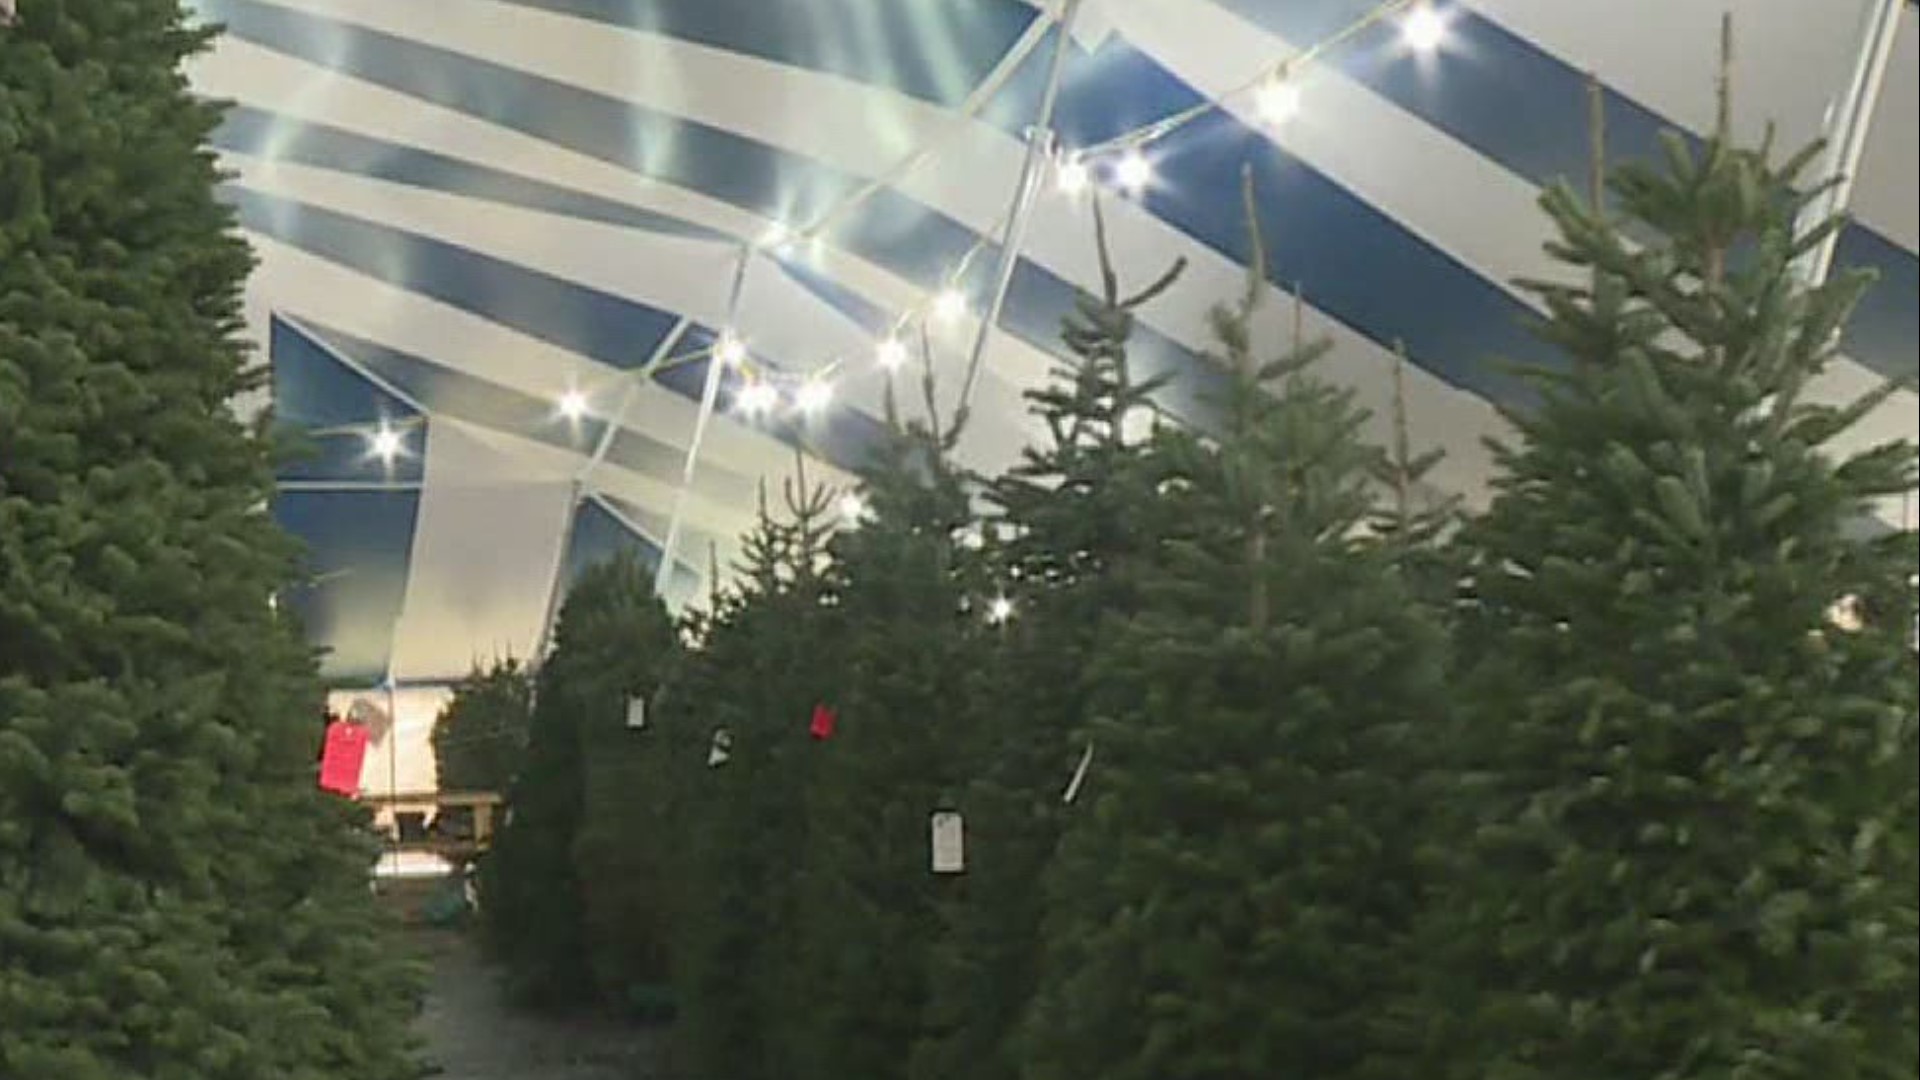 The iconic blue and white striped tent was set up a bit earlier this year.